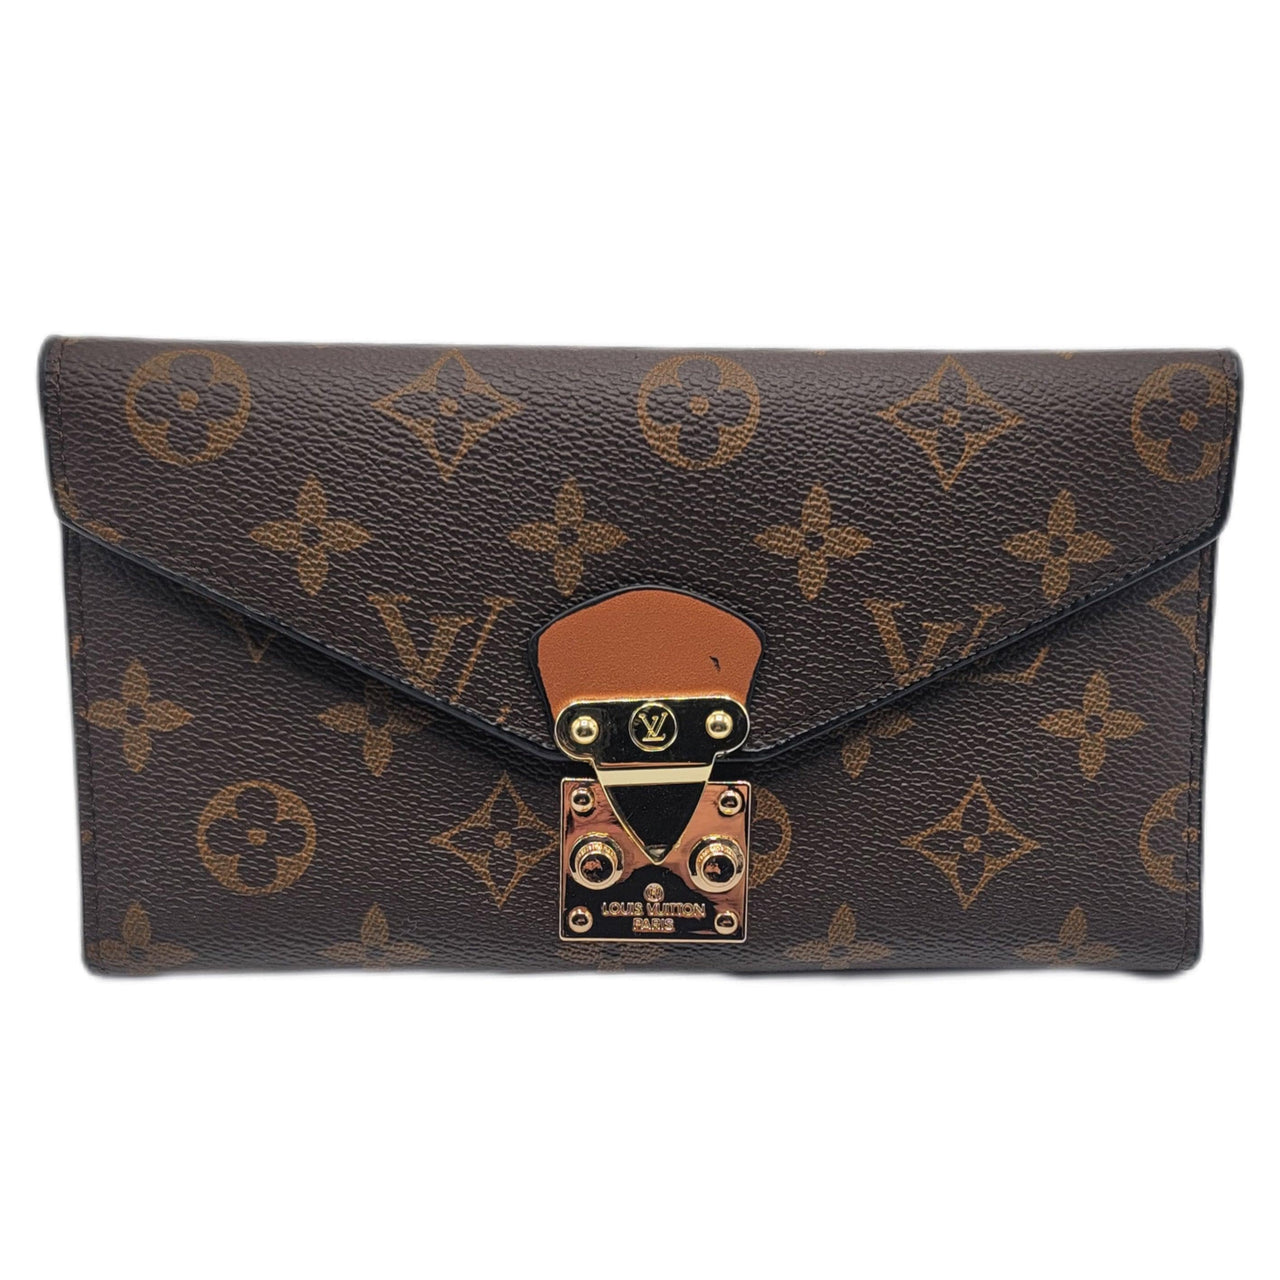 The Bag Couture Luggage & Bags Louis Vuitton 3 Fold Wallet Lock